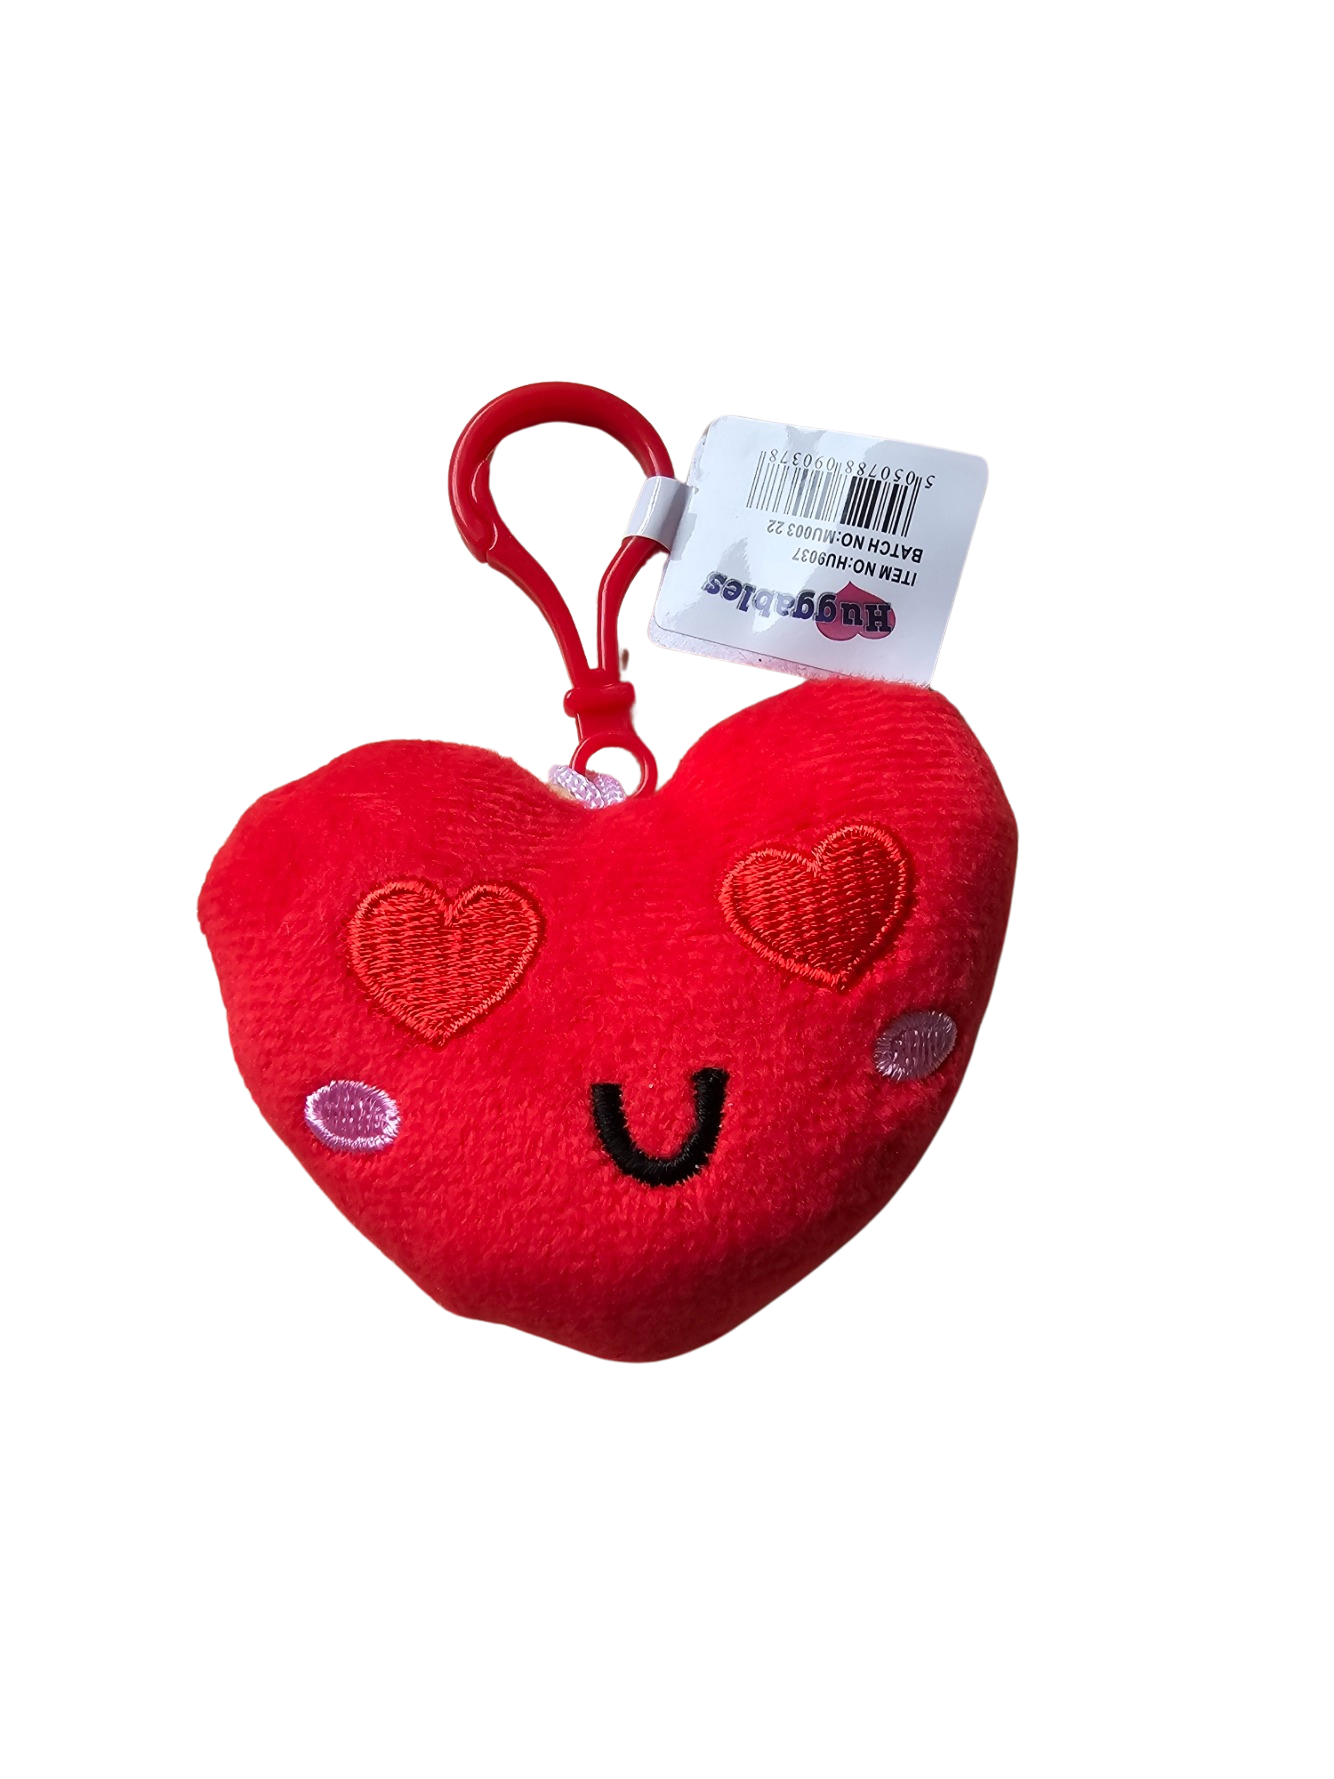 Plush Hearts - Huggable - Red or Pink with Clip